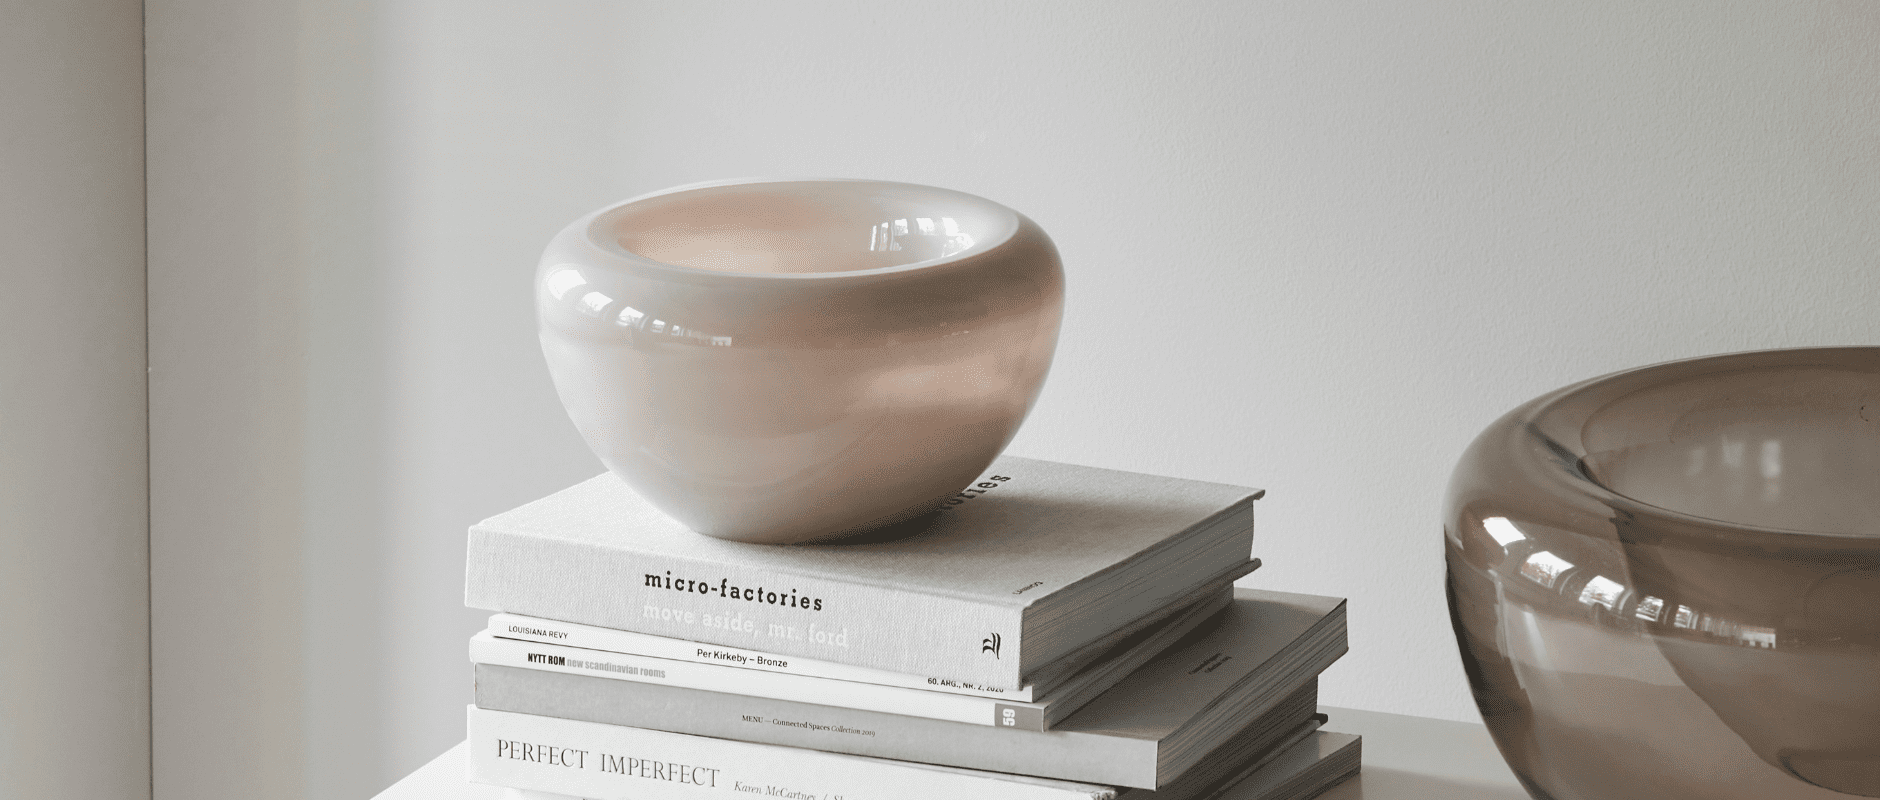 A photo of the Kristina Dam Studio Opal Bowl in Beige, placed on top of a stack of books.